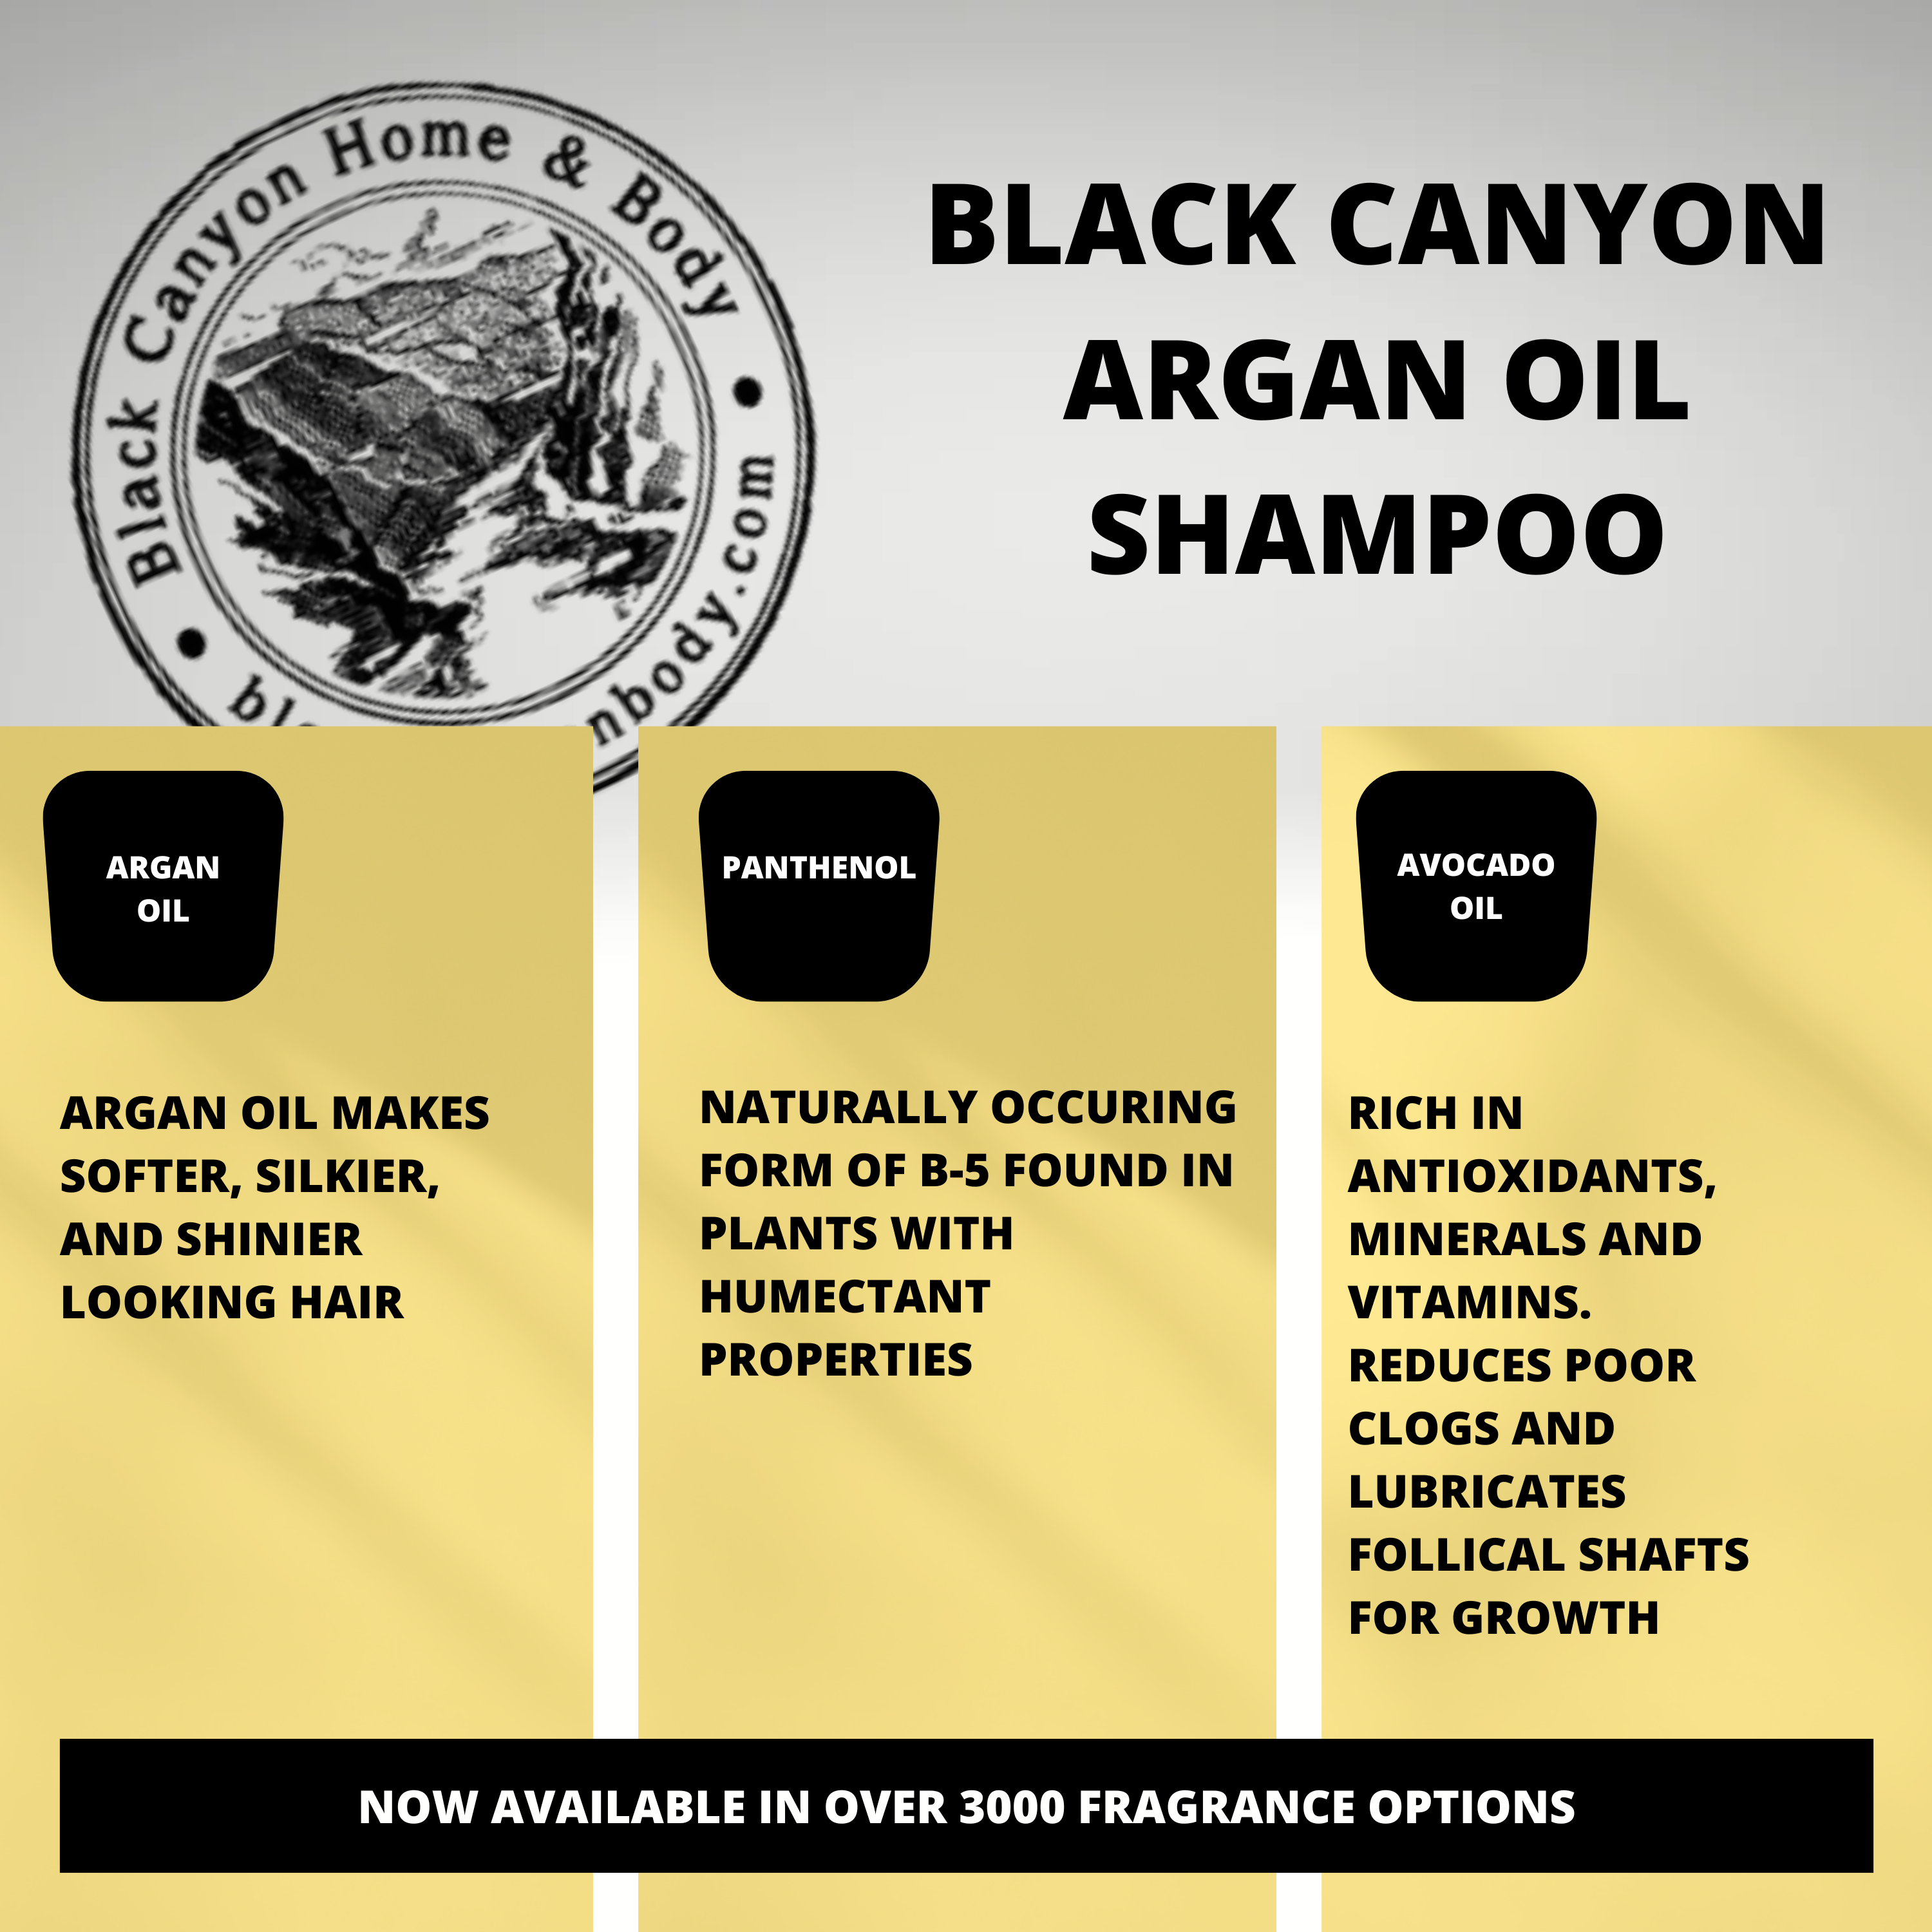 Black Canyon English Toffee Scented Shampoo with Argan Oil